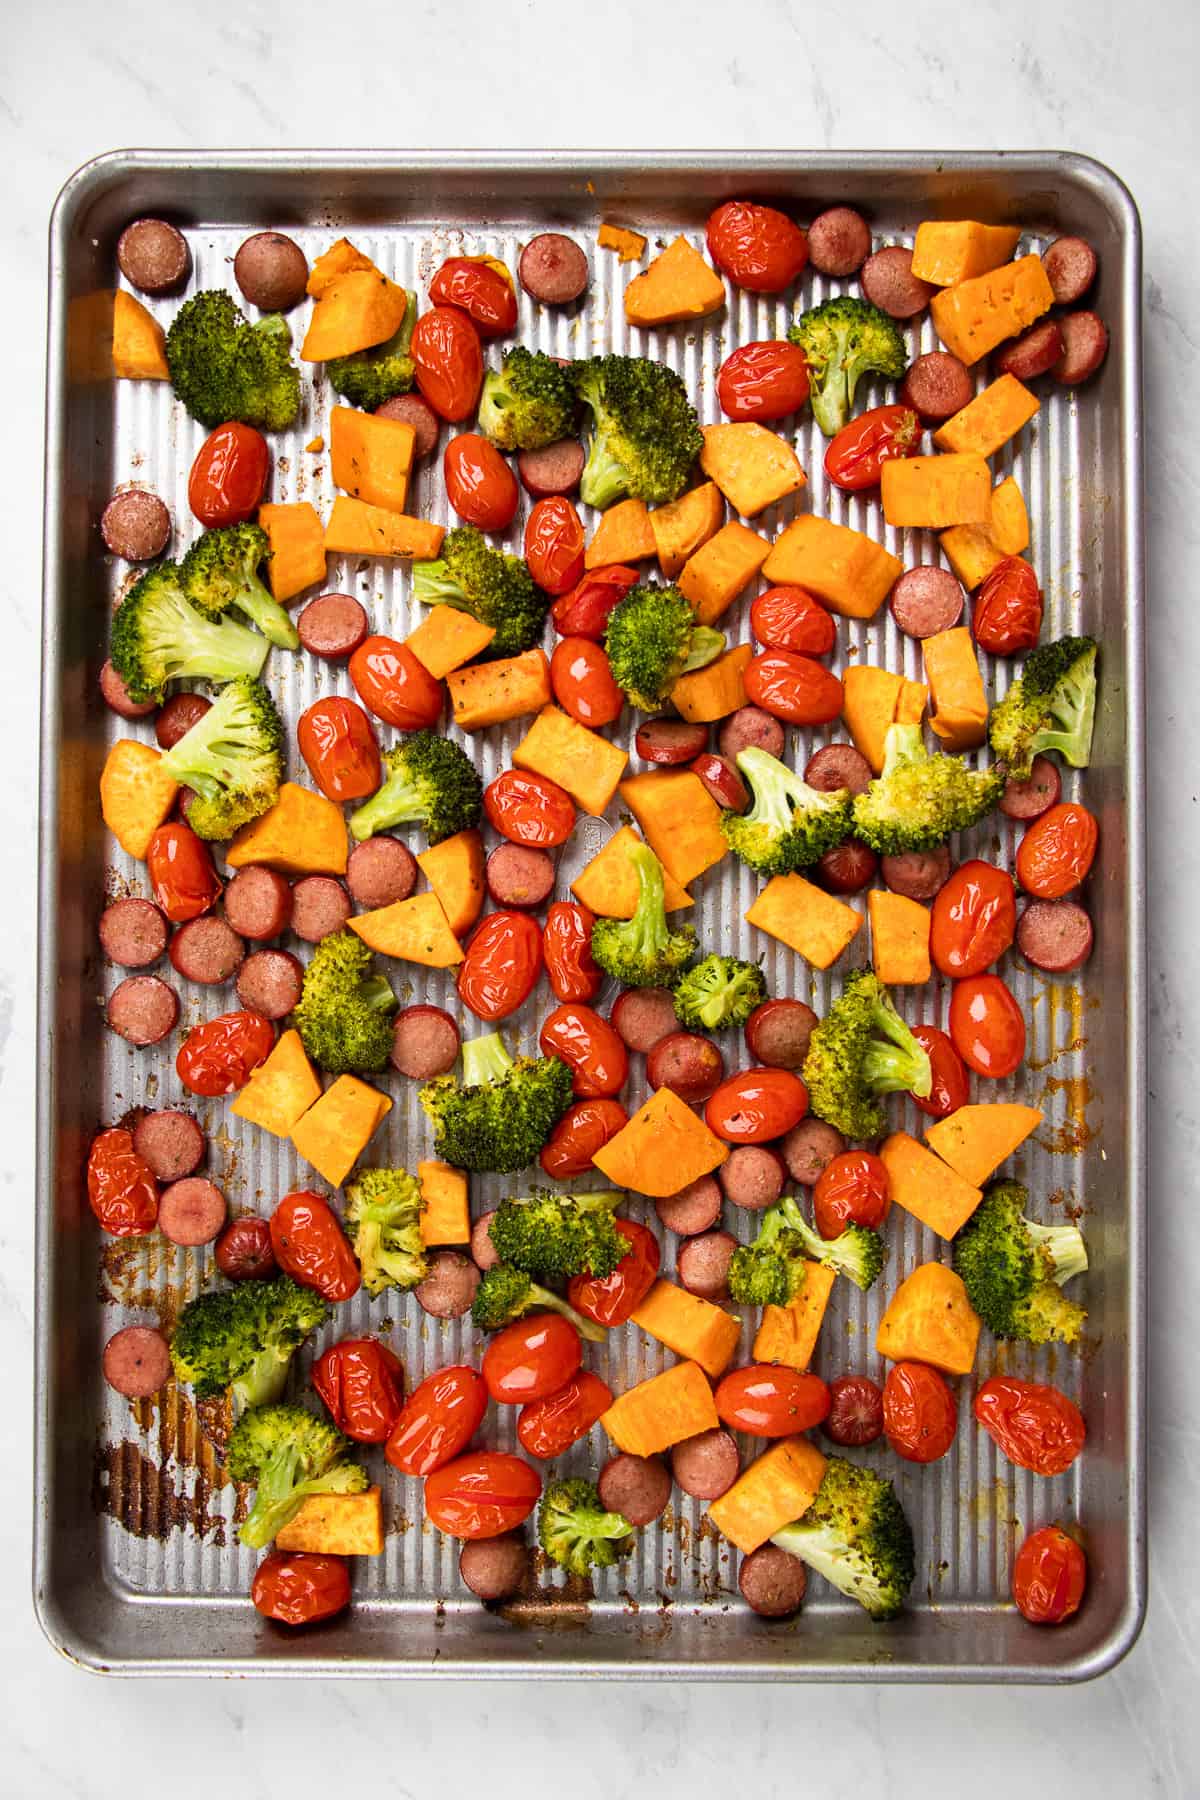 Roasted vegetables on a sheet pan.